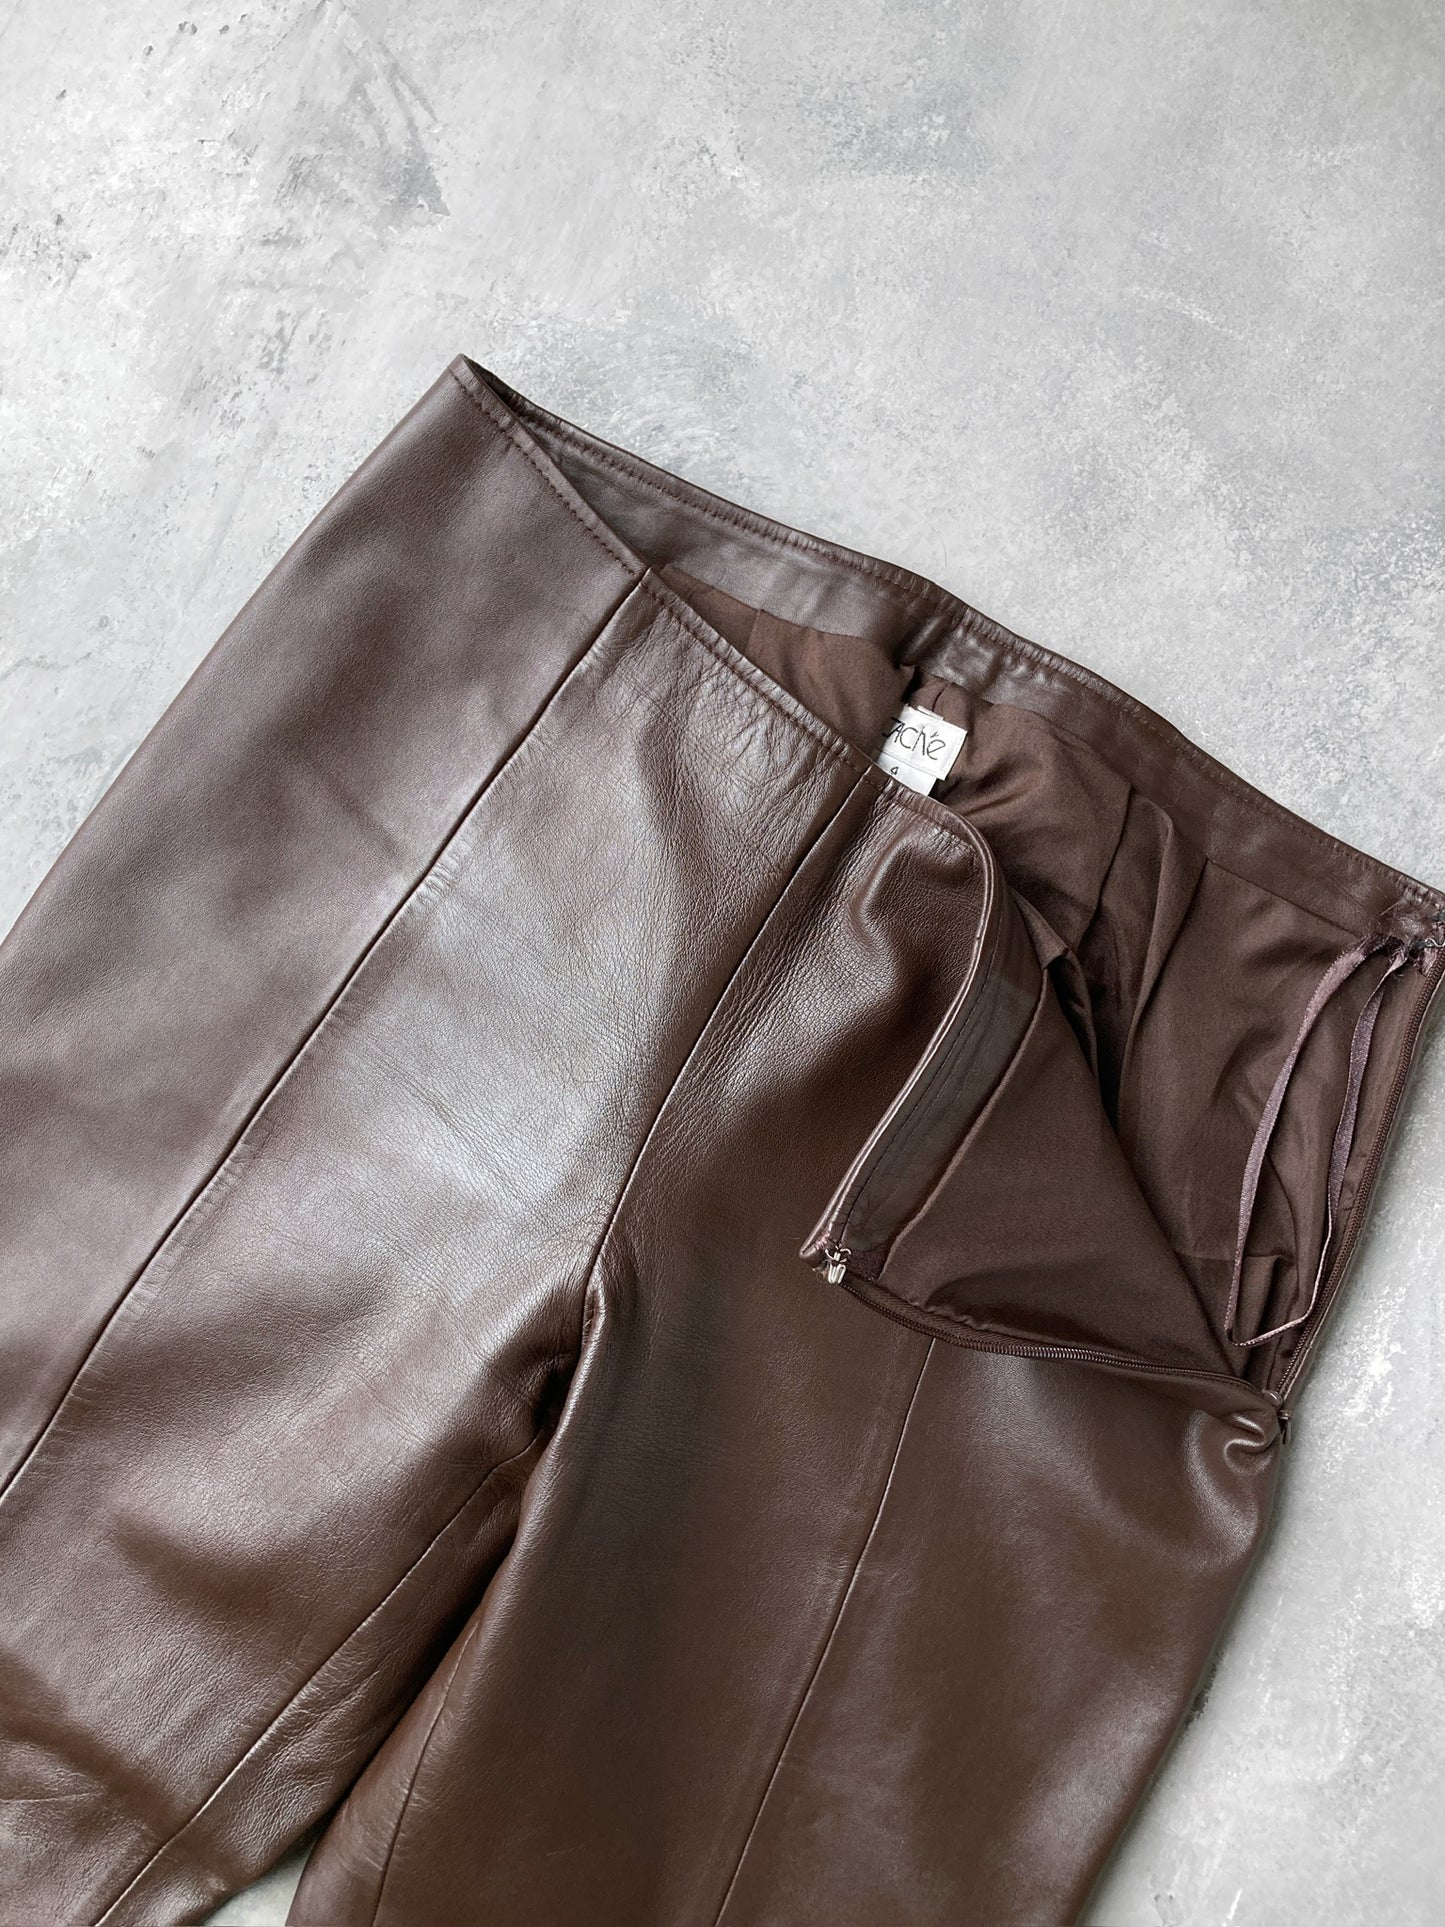 Brown Leather Pants 90's - 4